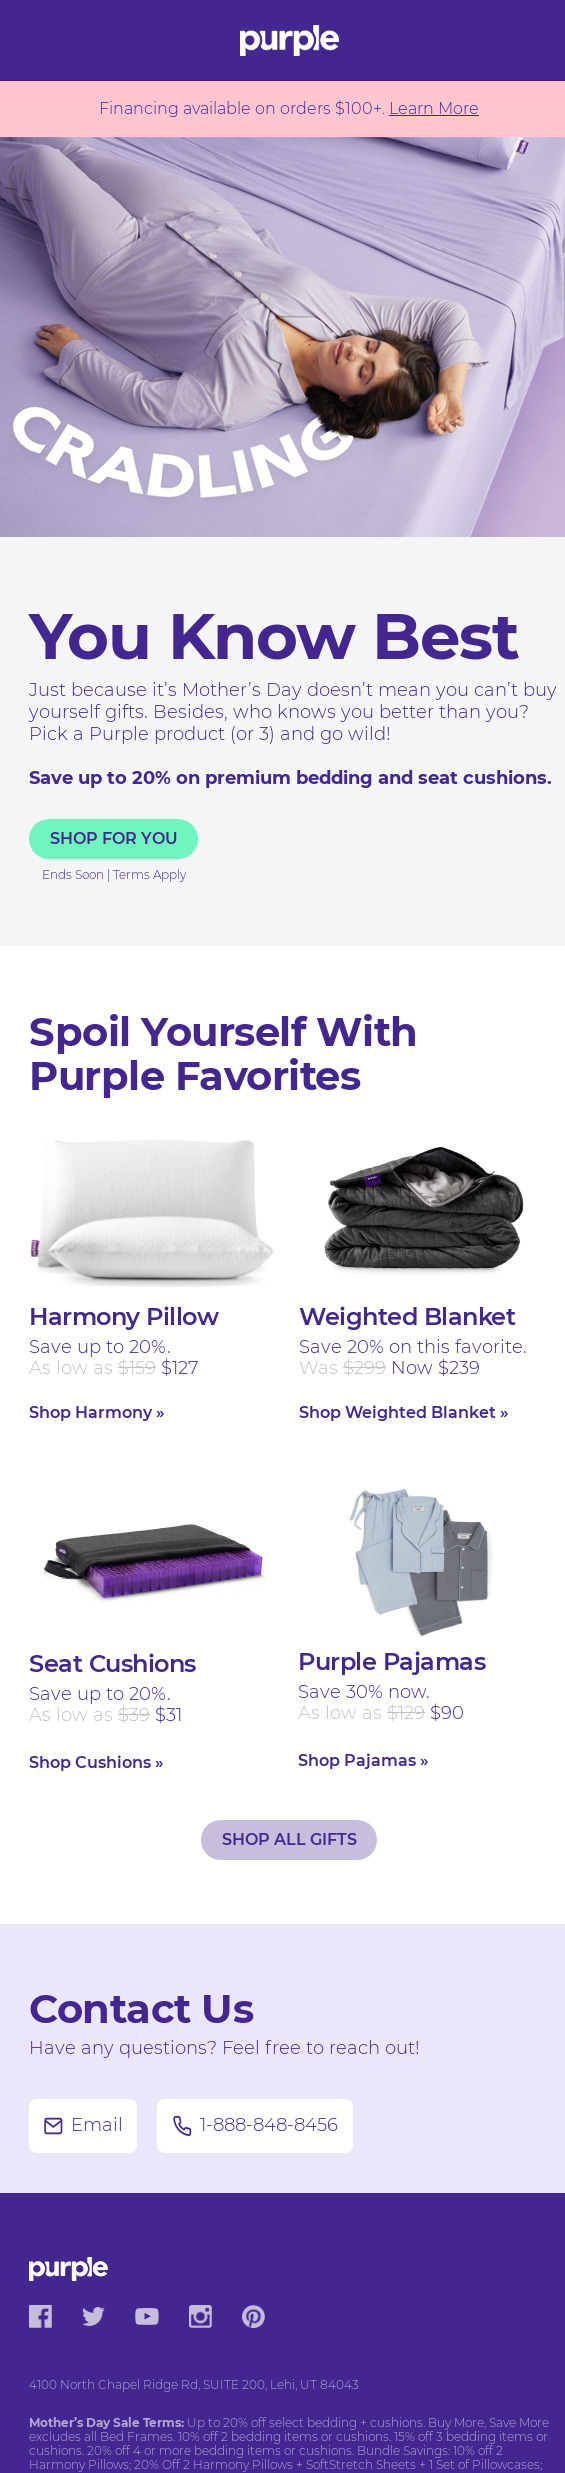 Purple Mother's Day email